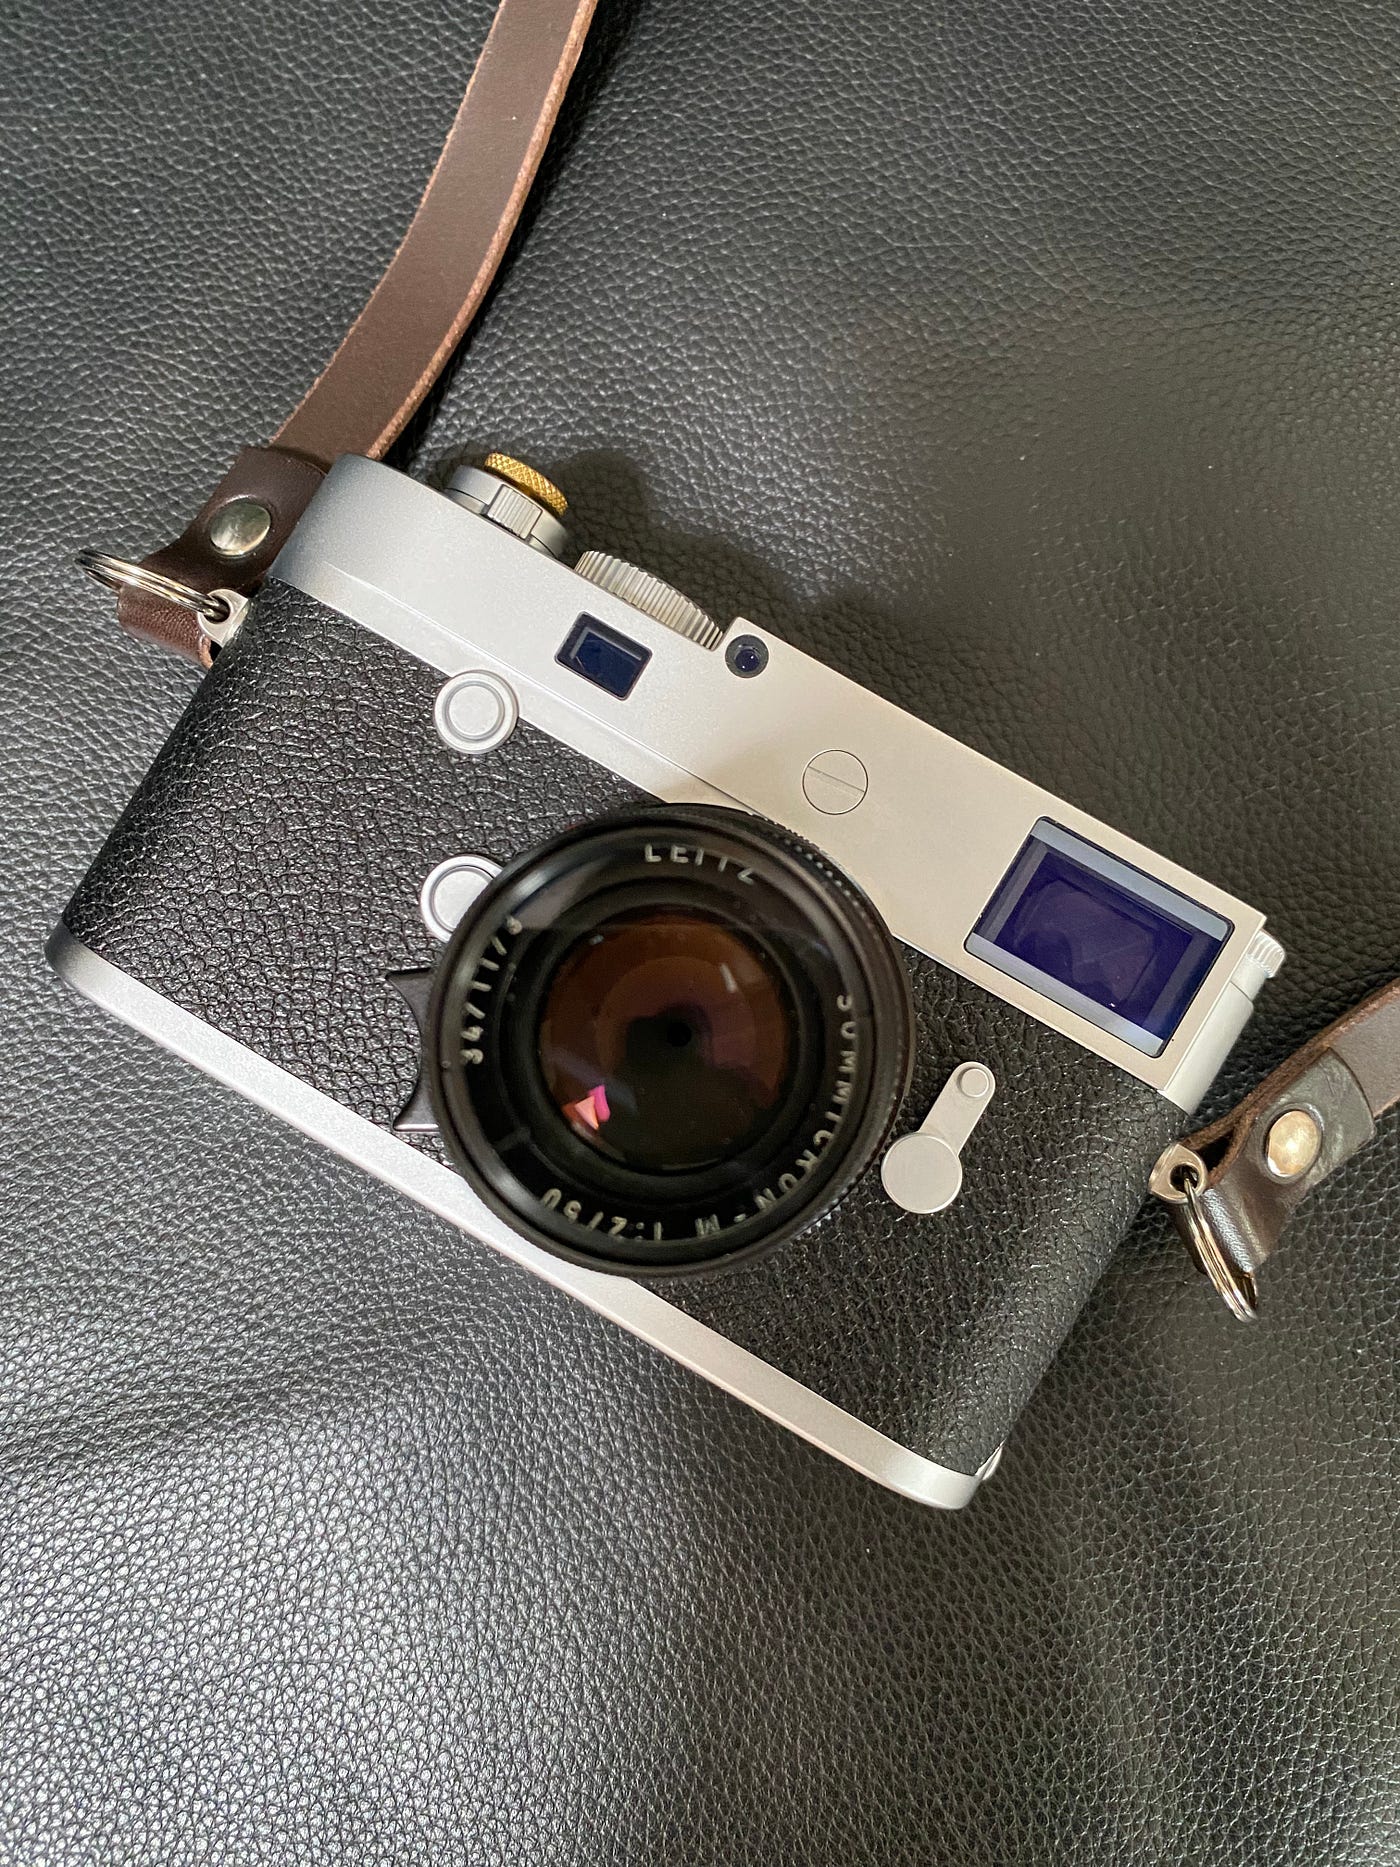 Leica M10-P Review: Leaving Sentimentality Behind with Ambivalence